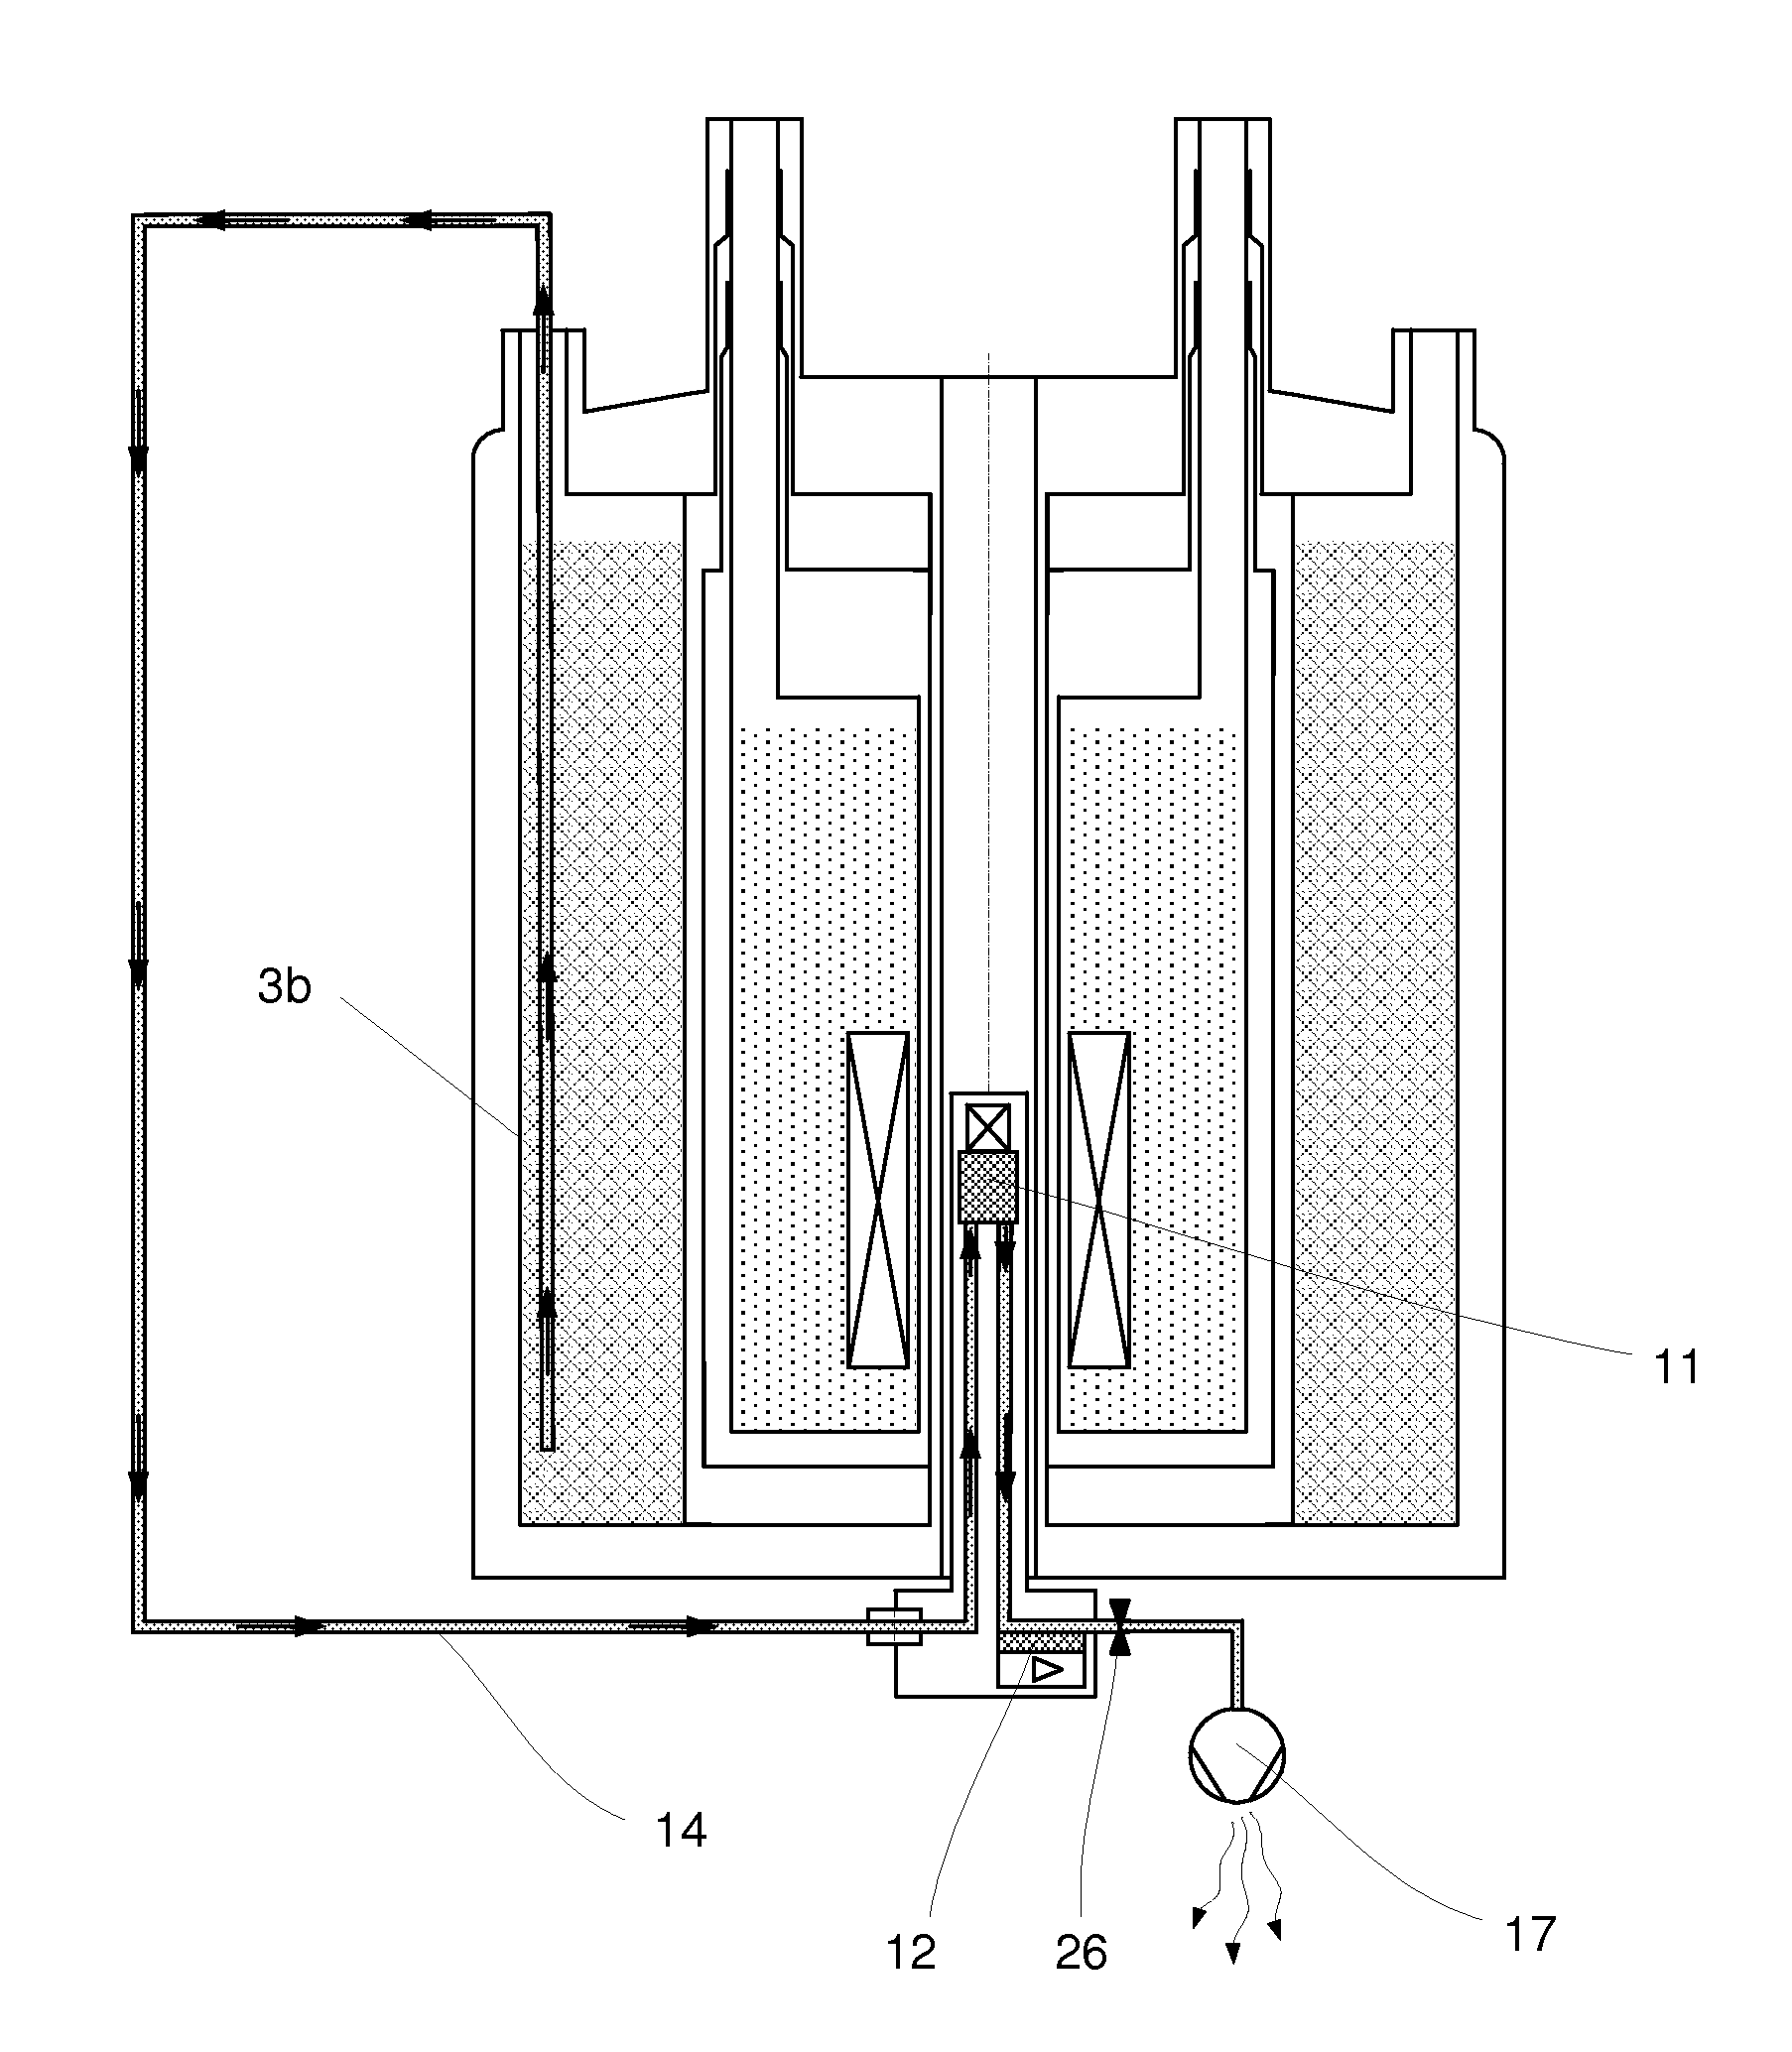 Cryogenic probehead cooler in a nuclear magnetic resonance apparatus